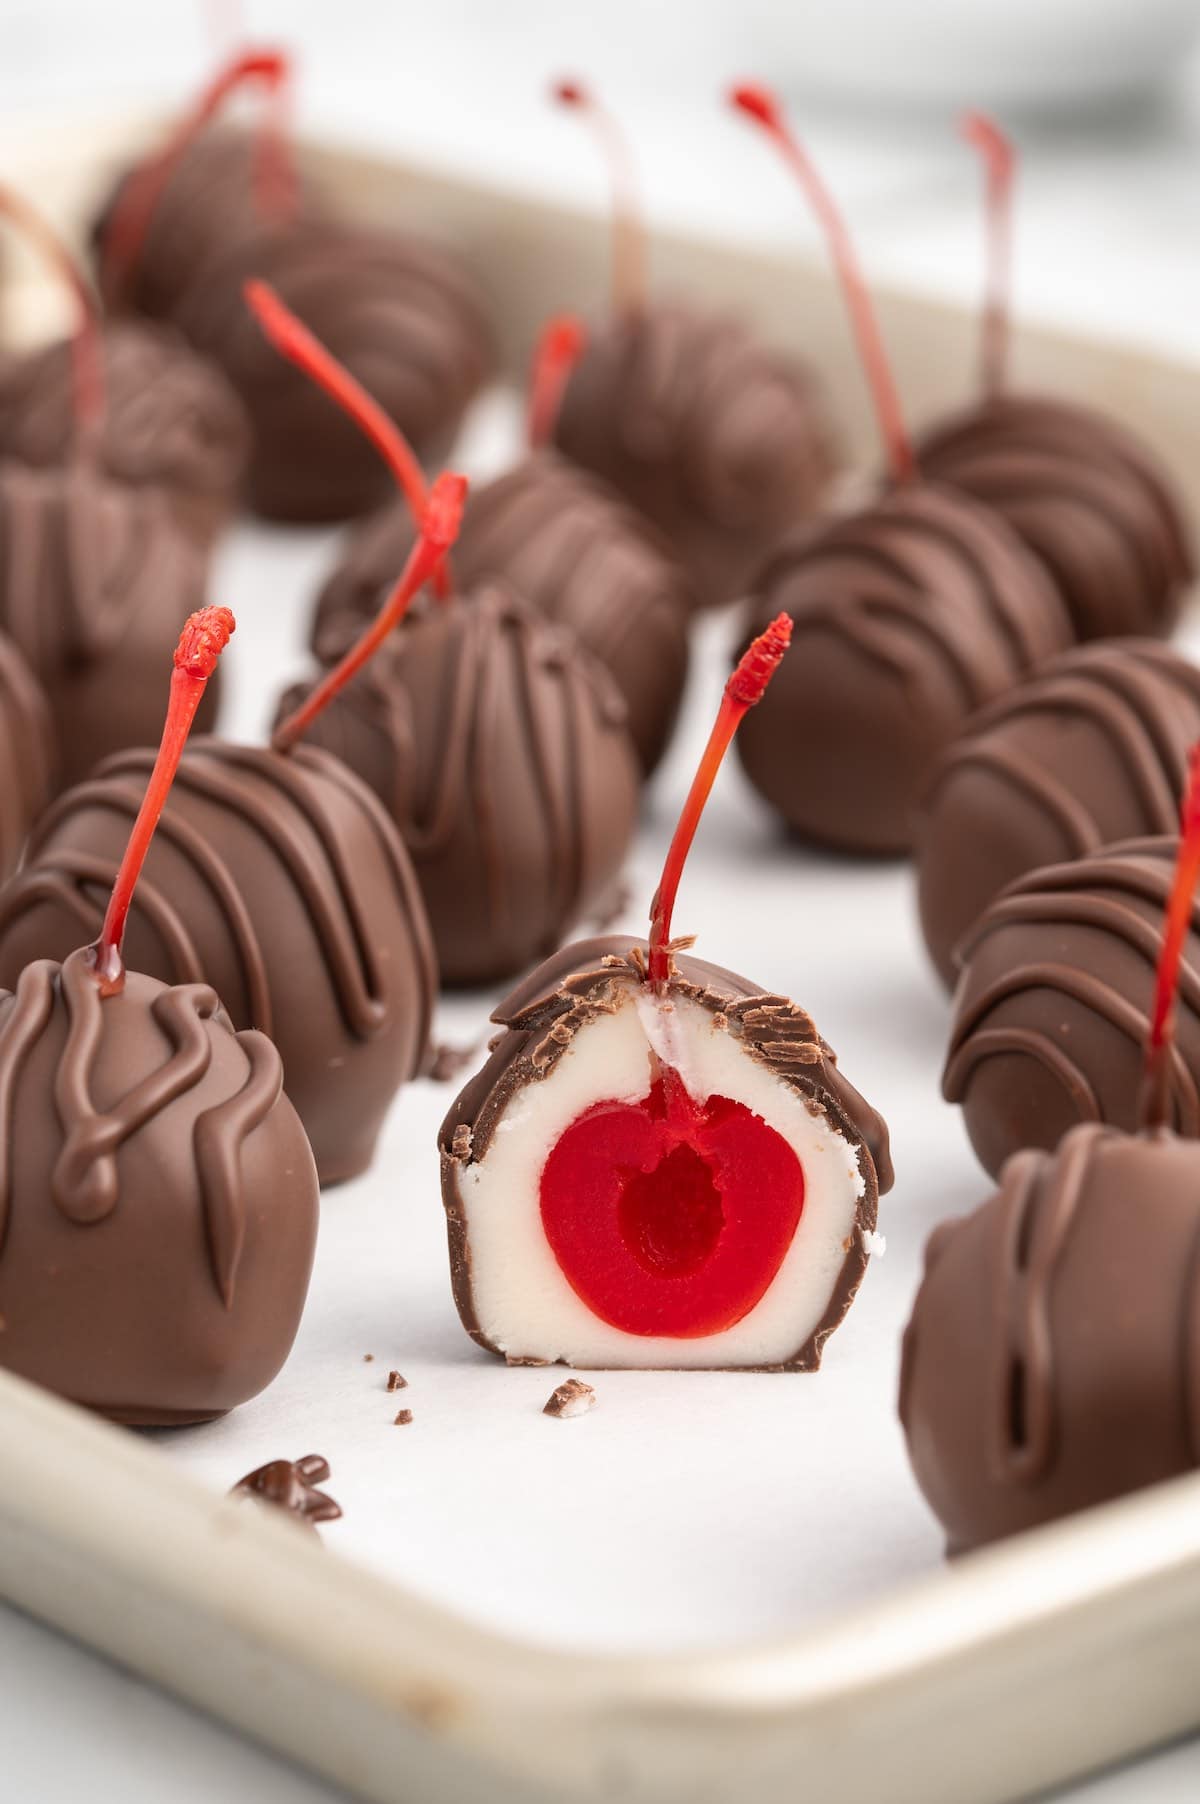 Chocolate Covered Cherries split in half and placed together with the other cherries in baking sheet.